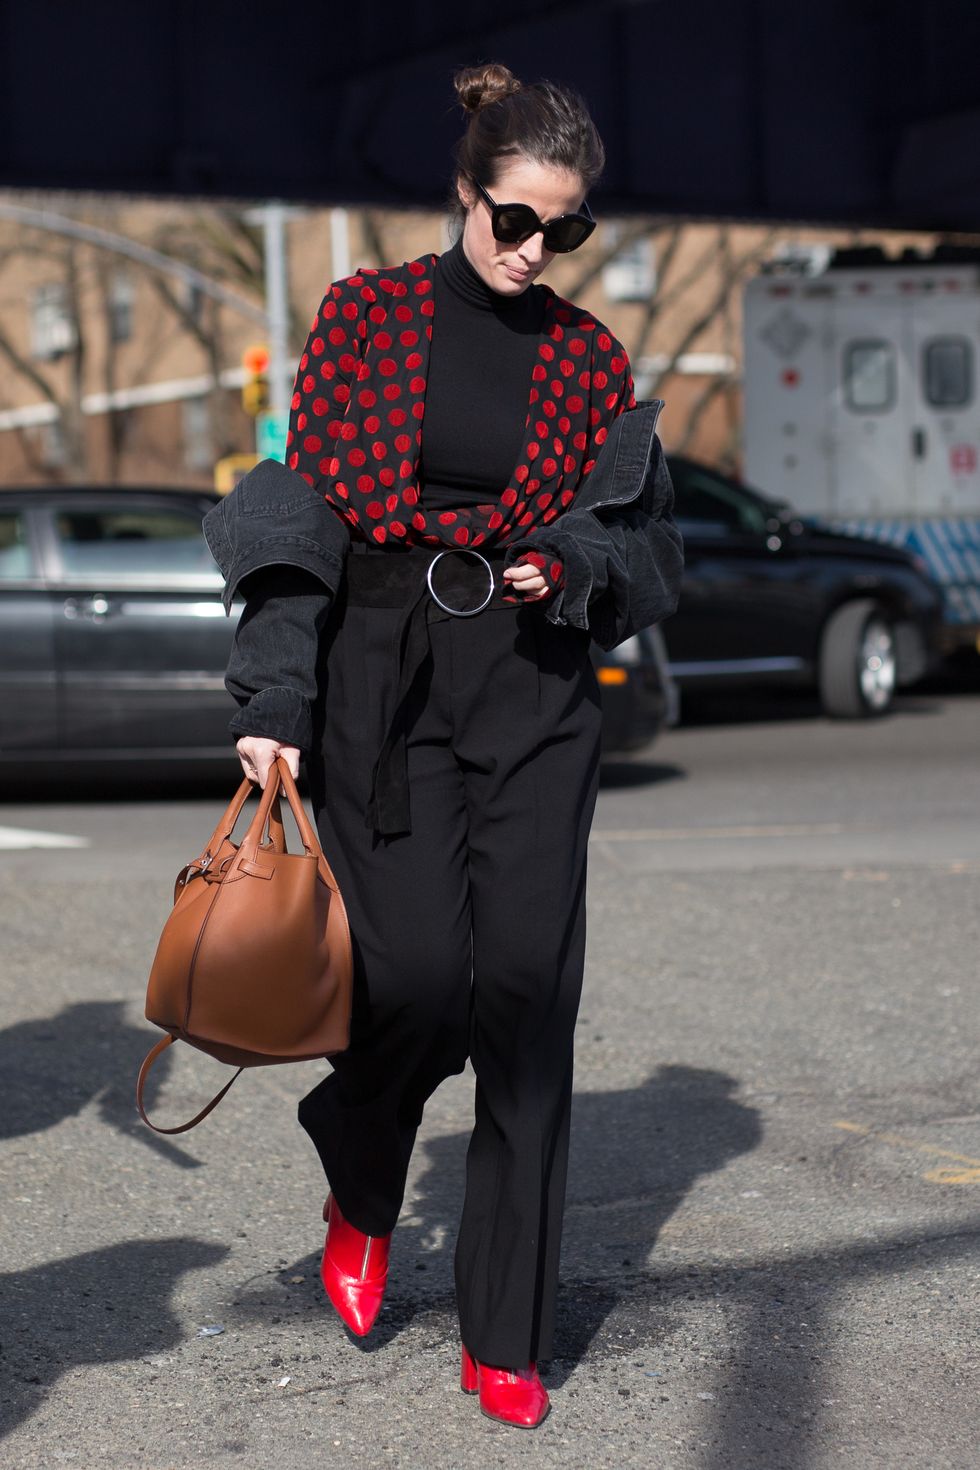 NEW YORK, NY - FEBRUARY 13:  A guest is seen on the street attending Coach 1941 during New York Fashion Week wearing black pants and sweater with red polka-dot cardigan on February 13, 2018 in New York City.  (Photo by Matthew Sperzel/Getty Images)